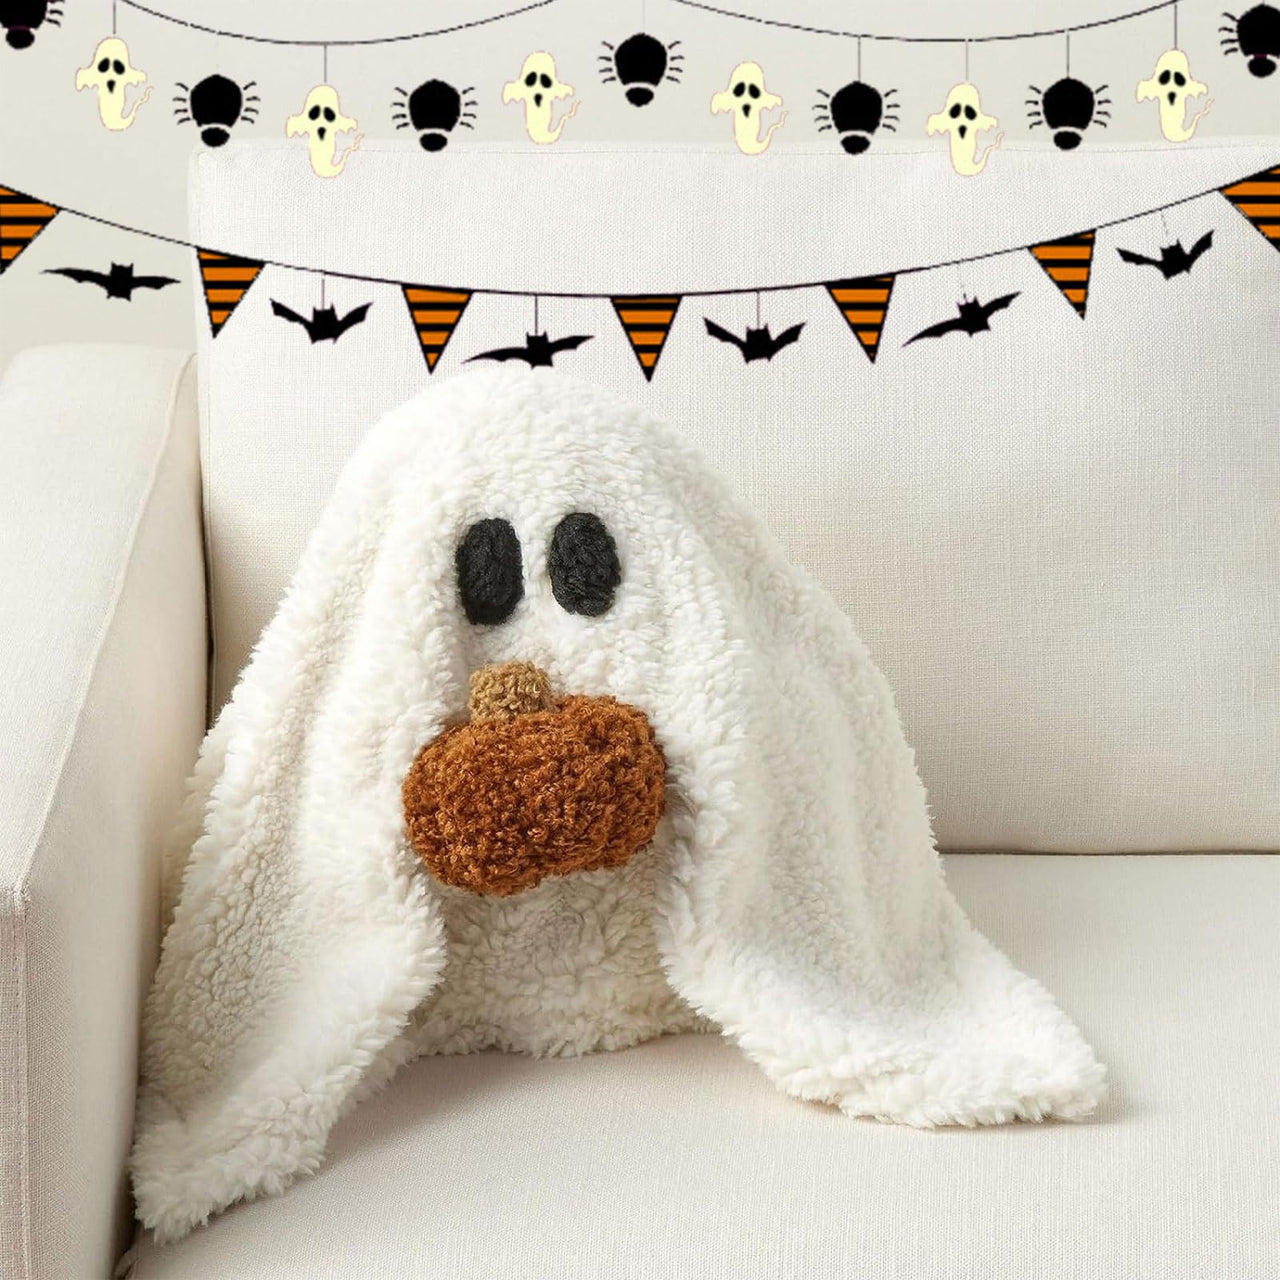 Yostyle Gus The Ghost with Pumpkin Pillow, 13" Gus The Halloween Ghost with Pumpkin Plush, Soft Stuffed Halloween Ghost Plush for Kids and Adults